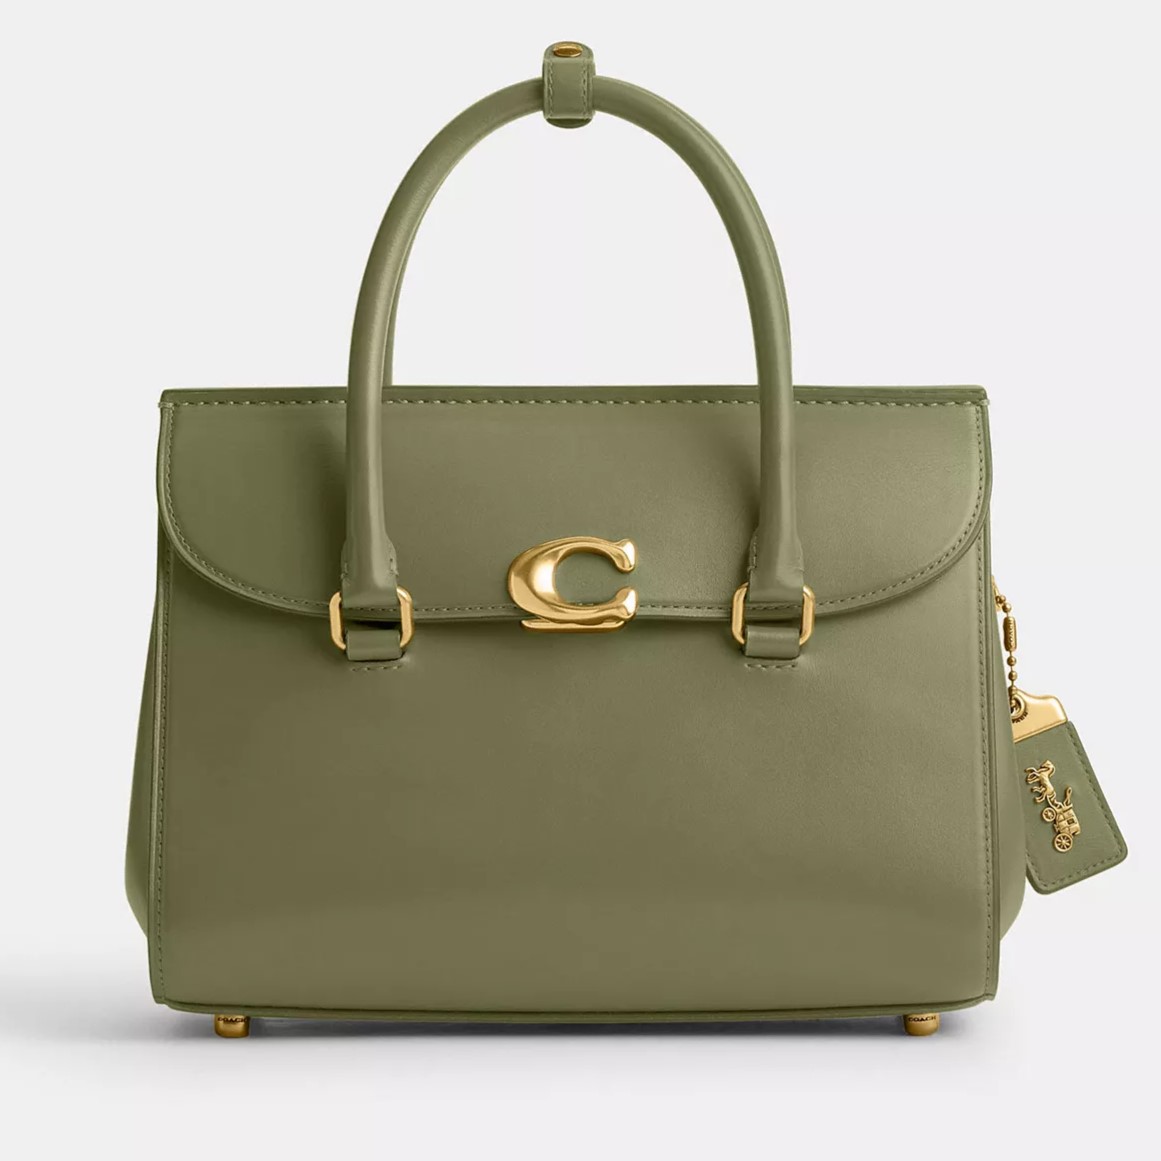 TÚI XÁCH COACH NỮ BROOME CARRYALL LUXE REFINED CALF LEATHER BRASS MOSS CP119 3